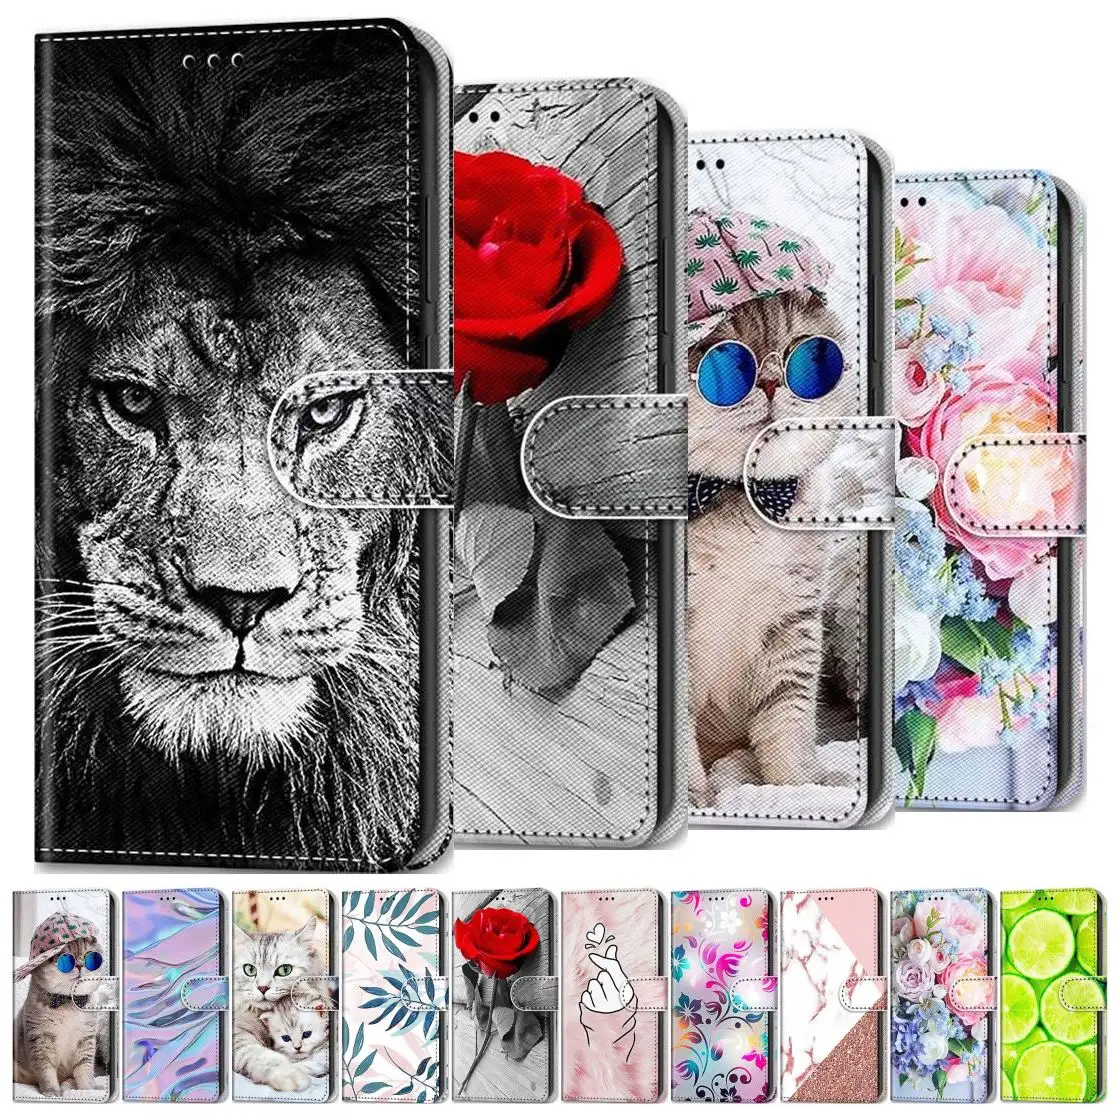 Rose Lion Painted Phone Shell For Case Huawei P Smart 2020 Z 2019 P40 Lite E P30 Pro P20 Plus 2018 Patterned Wallet Cover DP08F